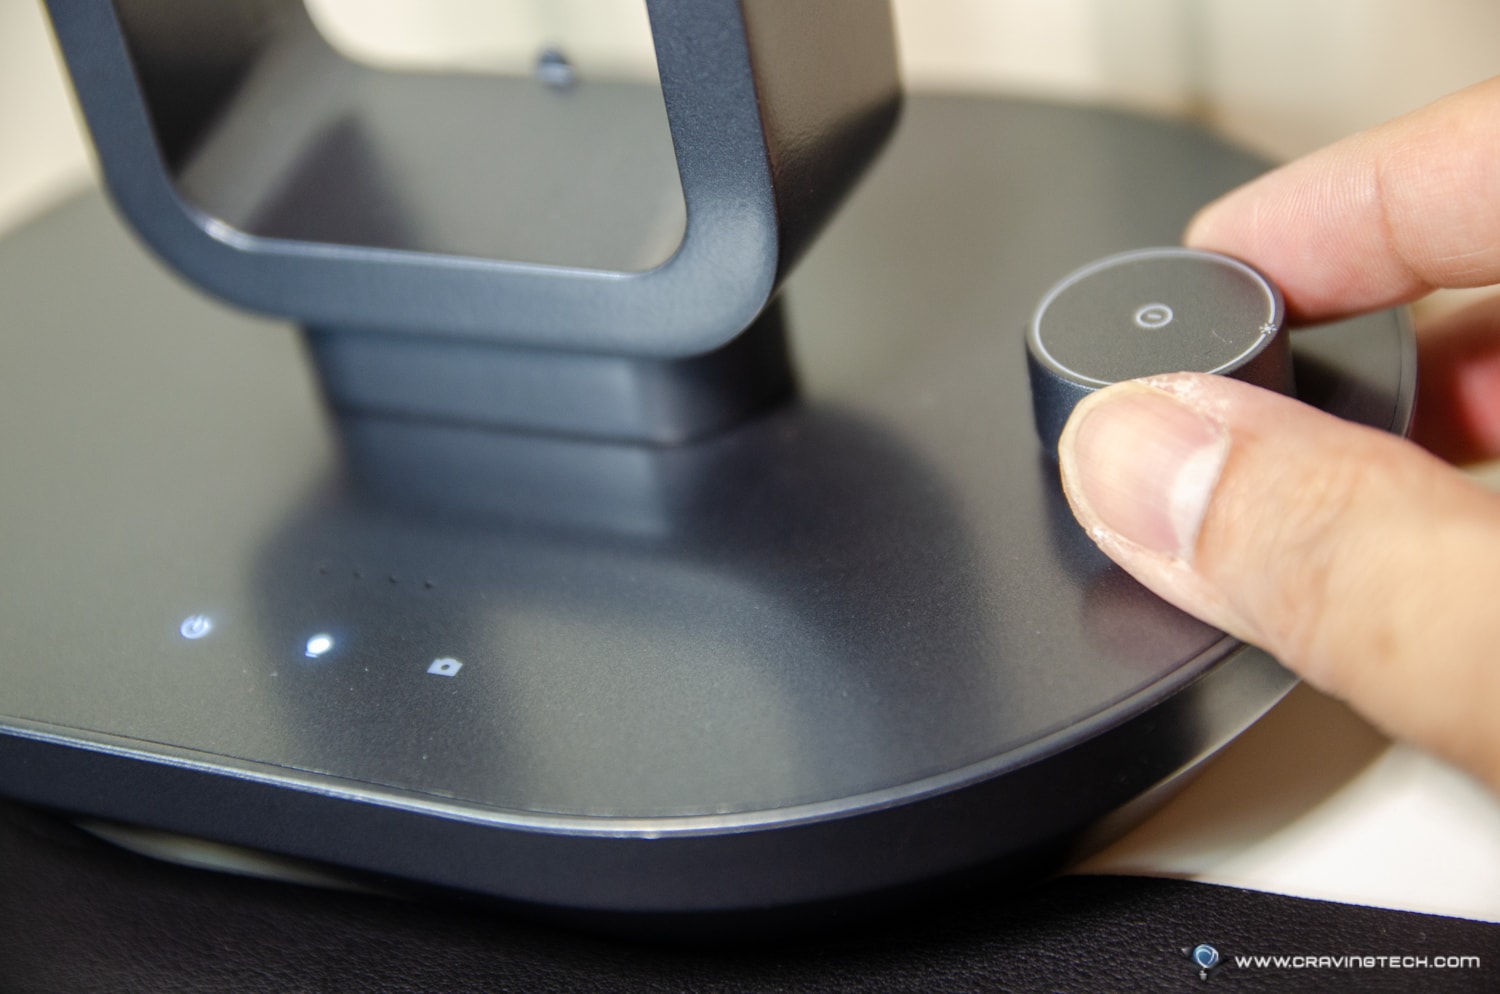 CZUR Aura Review - Scans books, objects, and documents without hands!